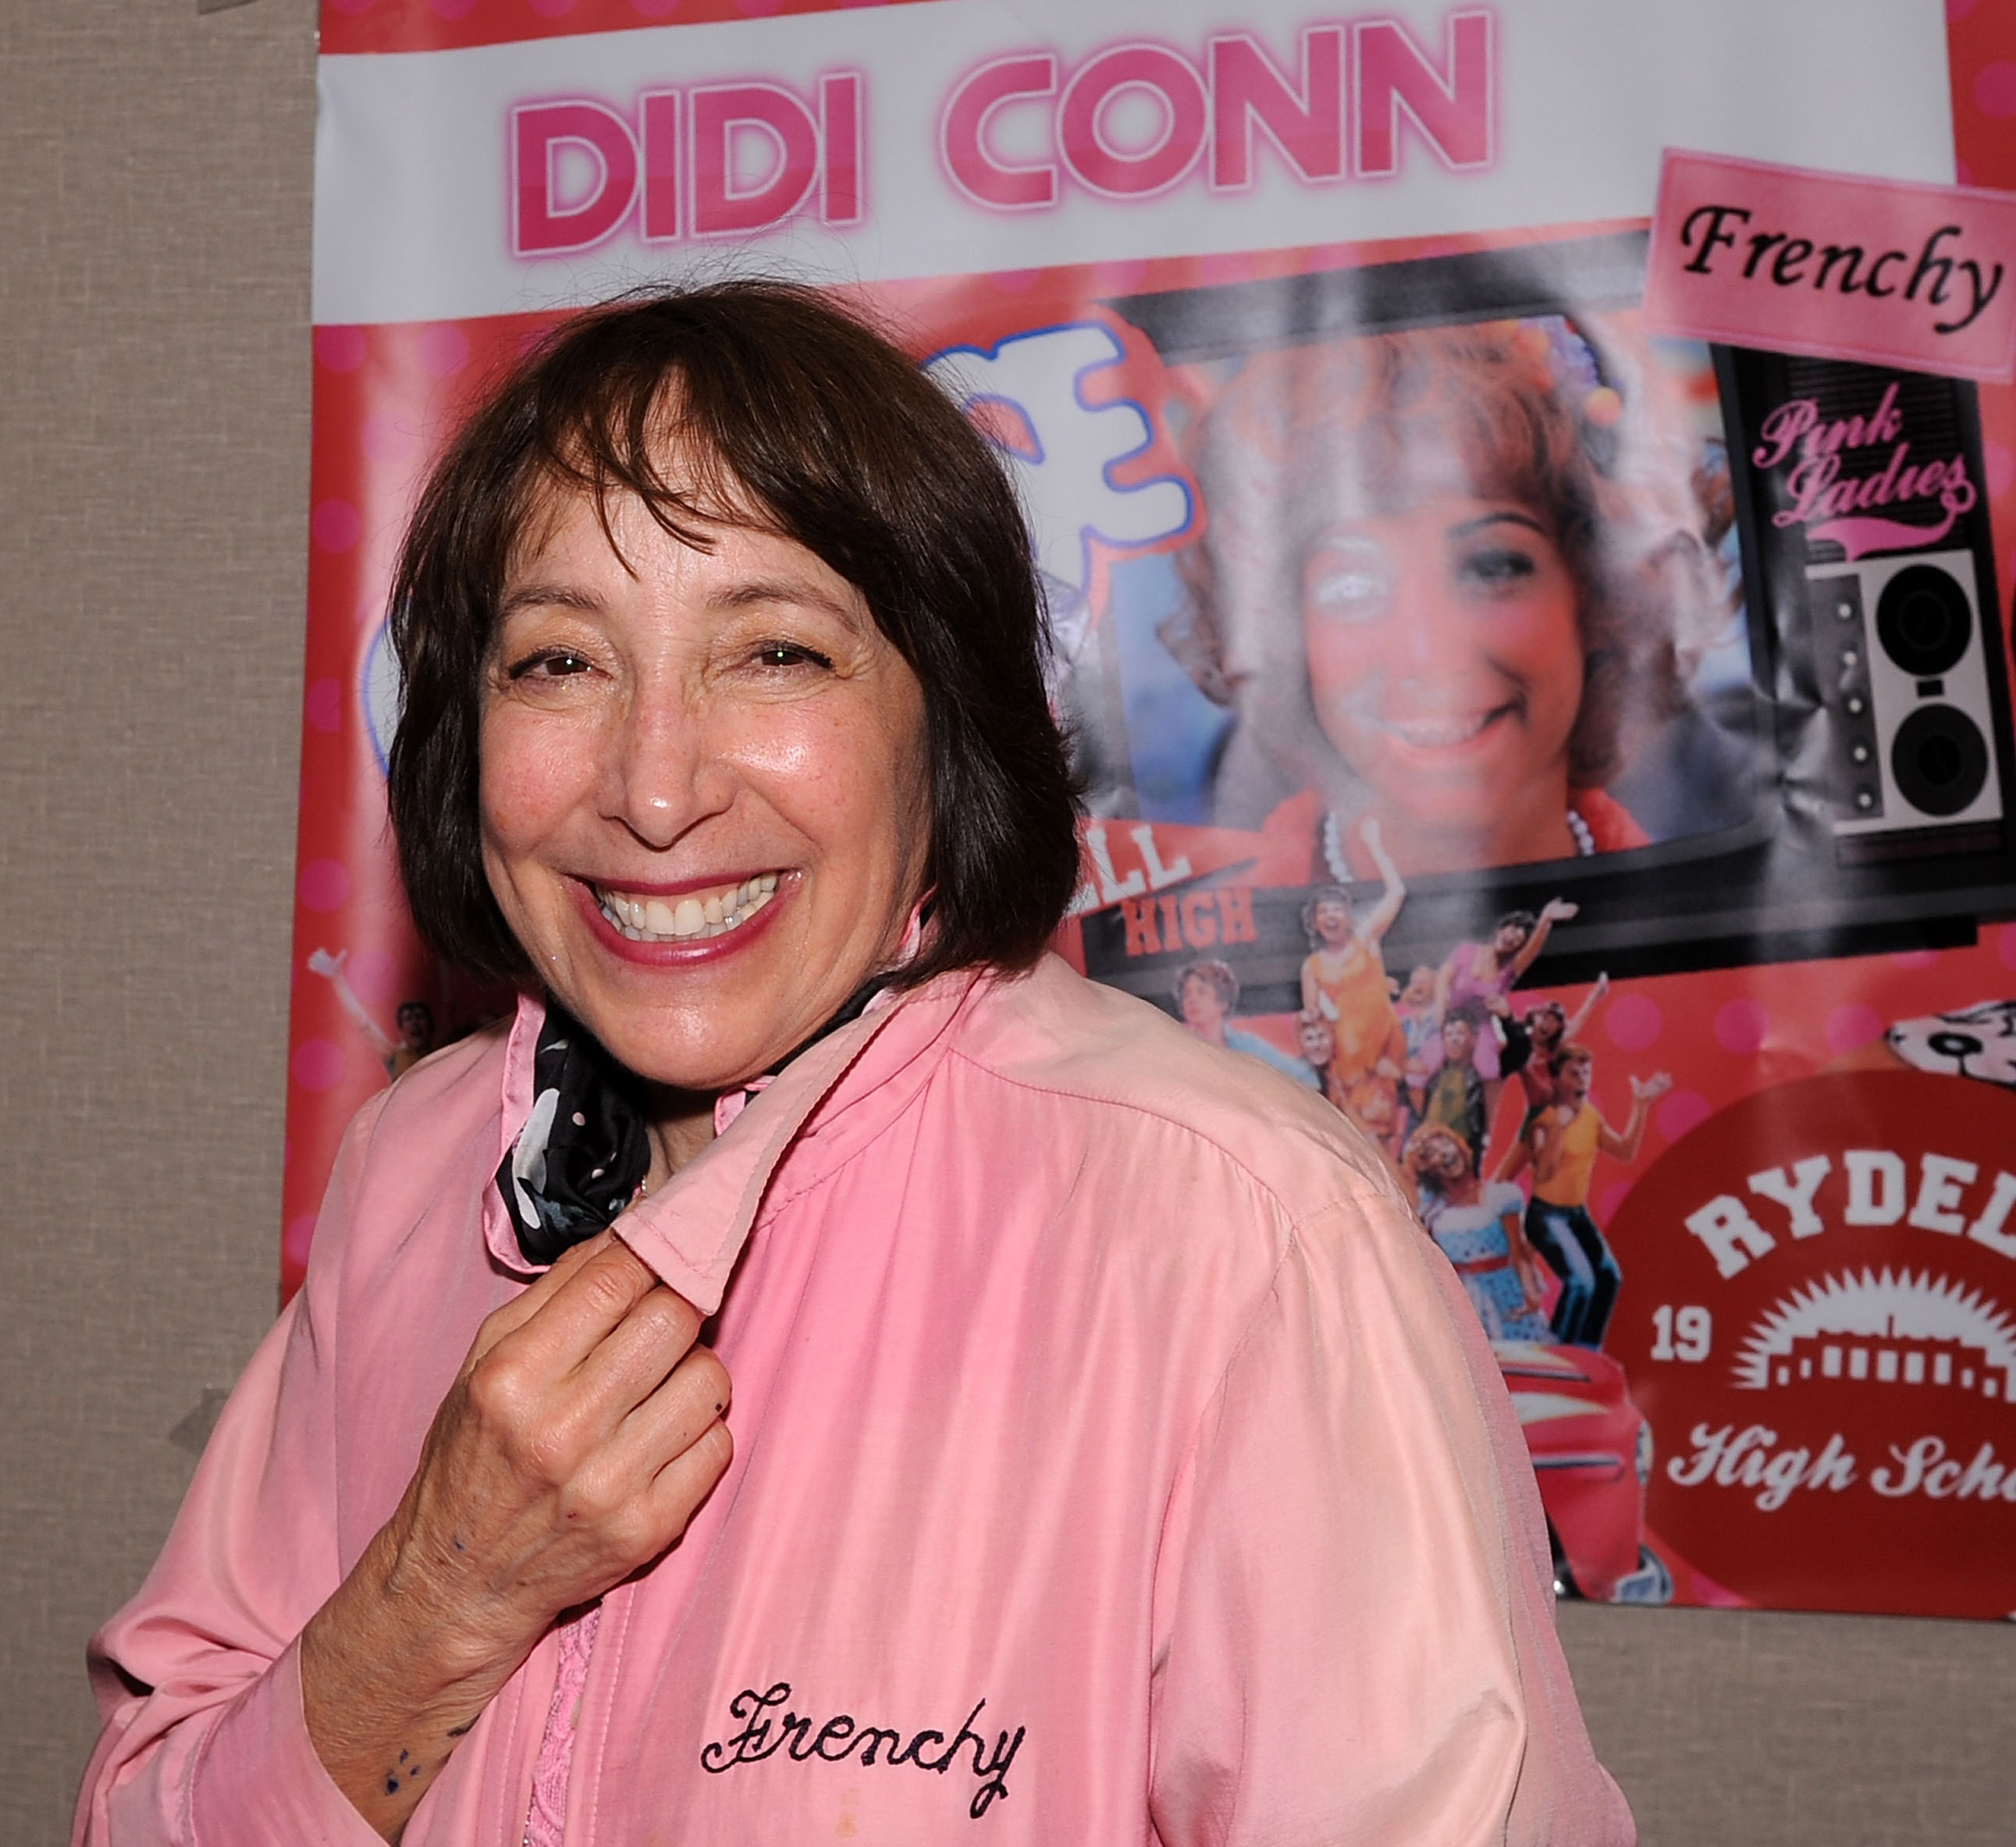 Didi Conn attends the Chiller Theatre Expo Spring 2018 at Hilton Parsippany on April 28, 2018 in Parsippany, New Jersey. | Source: Getty Images